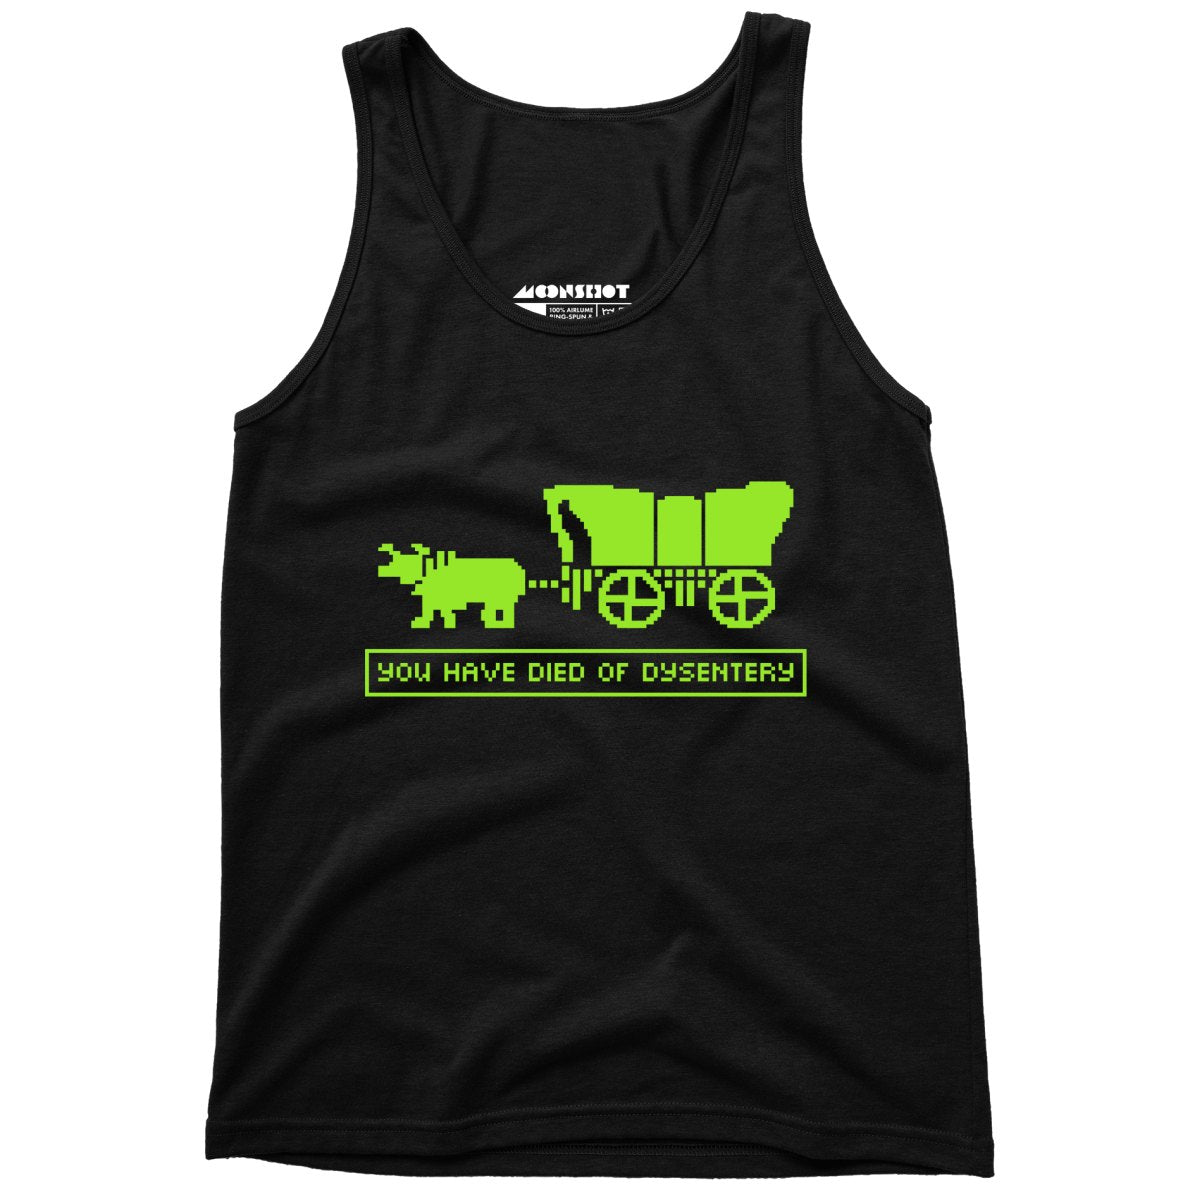 You Have Died of Dysentery - Unisex Tank Top